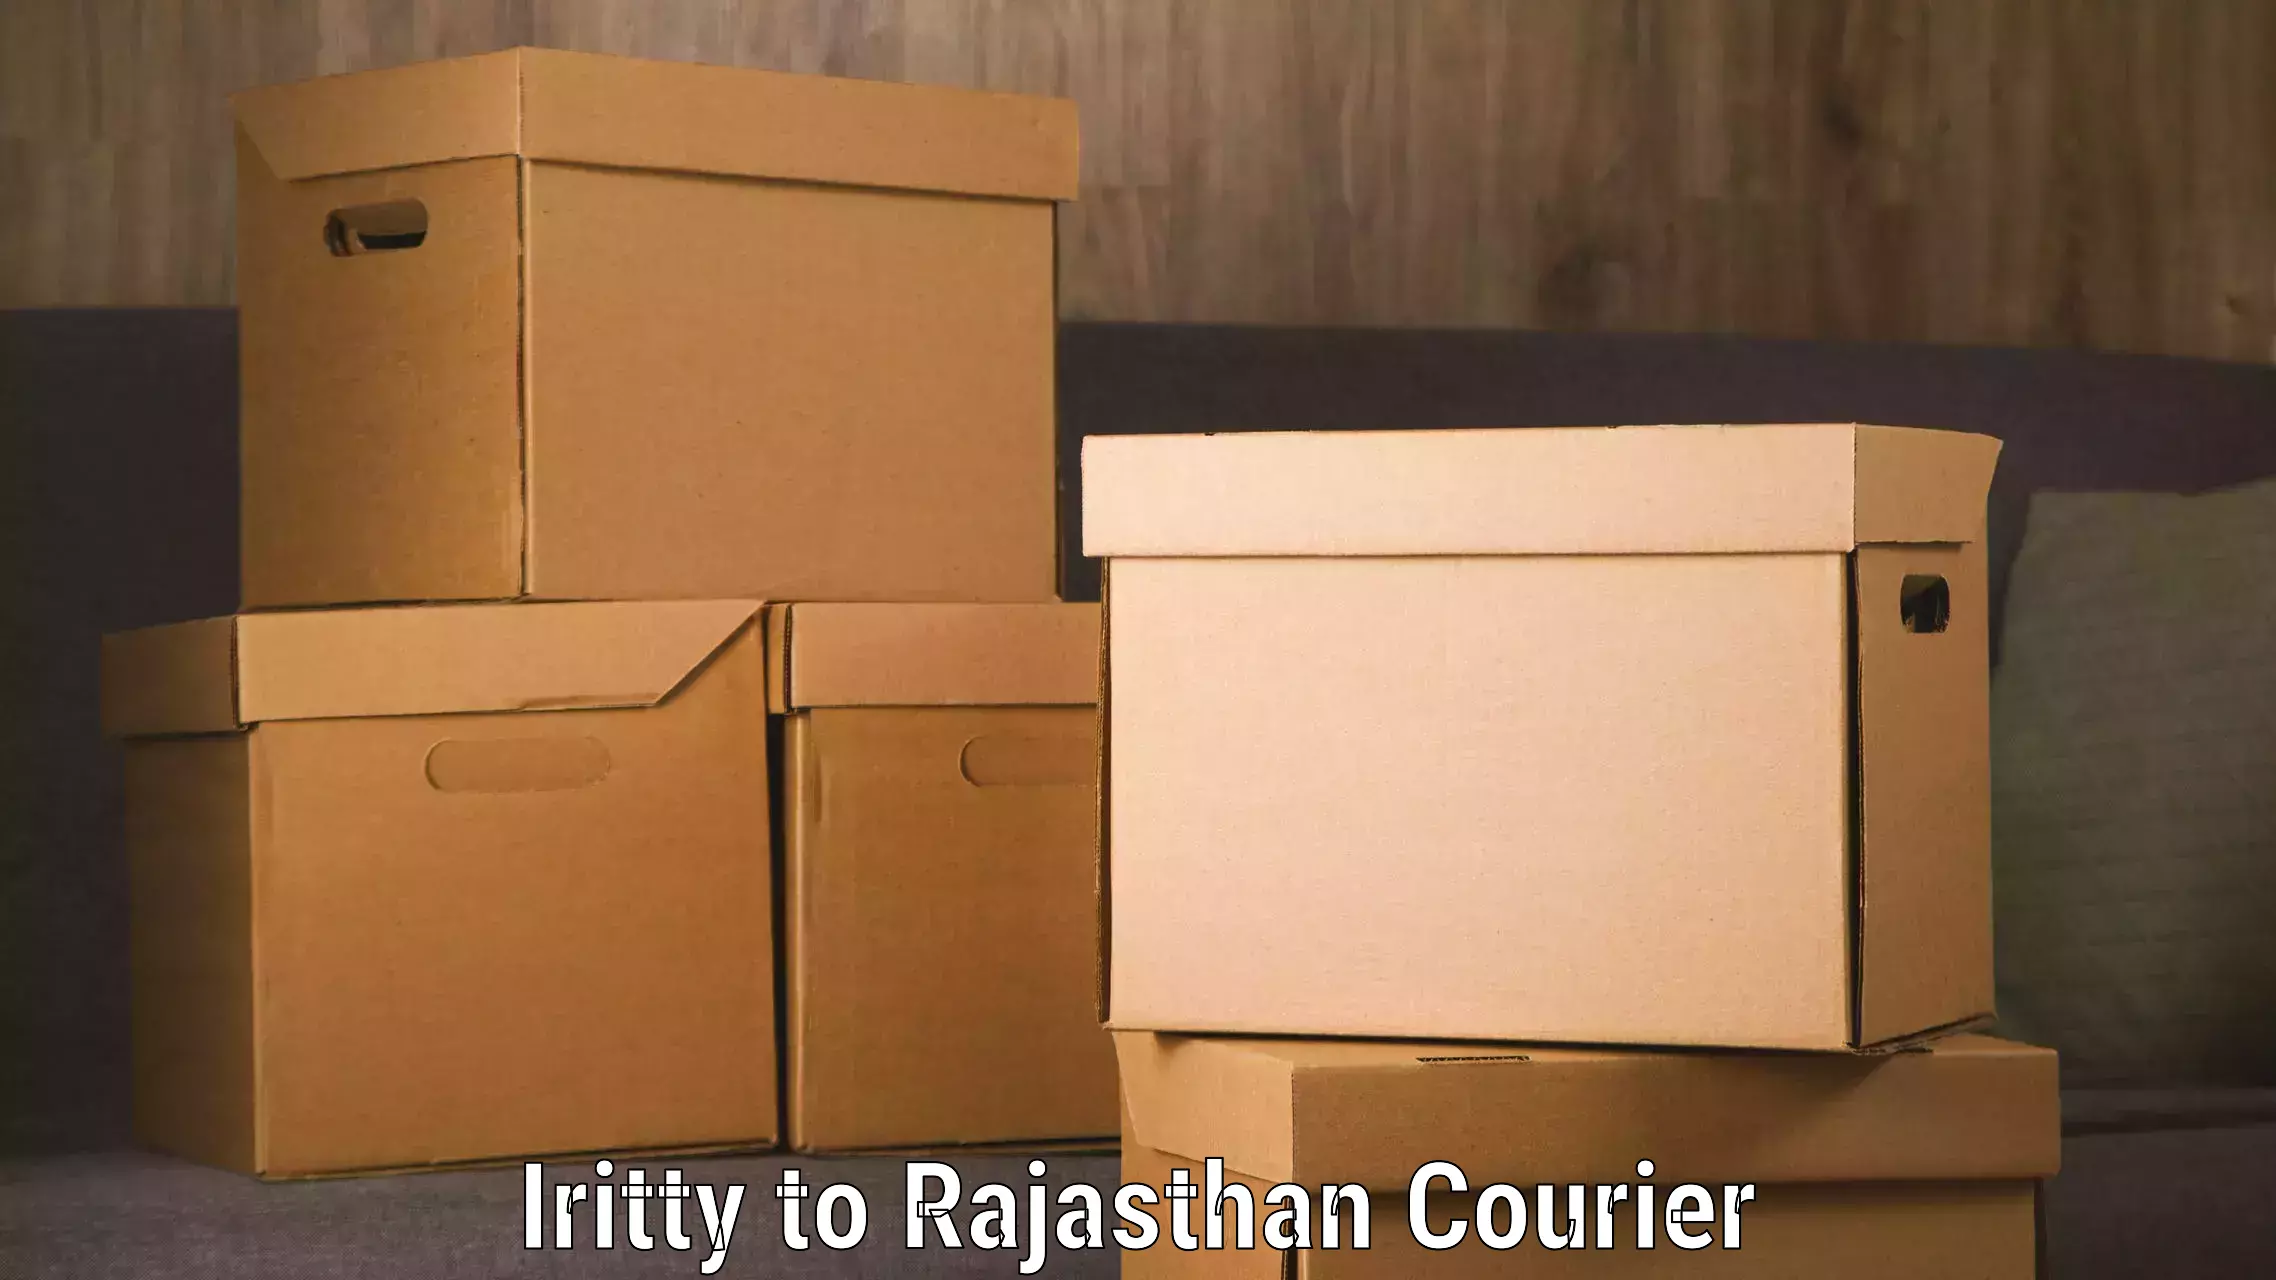 Courier service comparison Iritty to Kaman